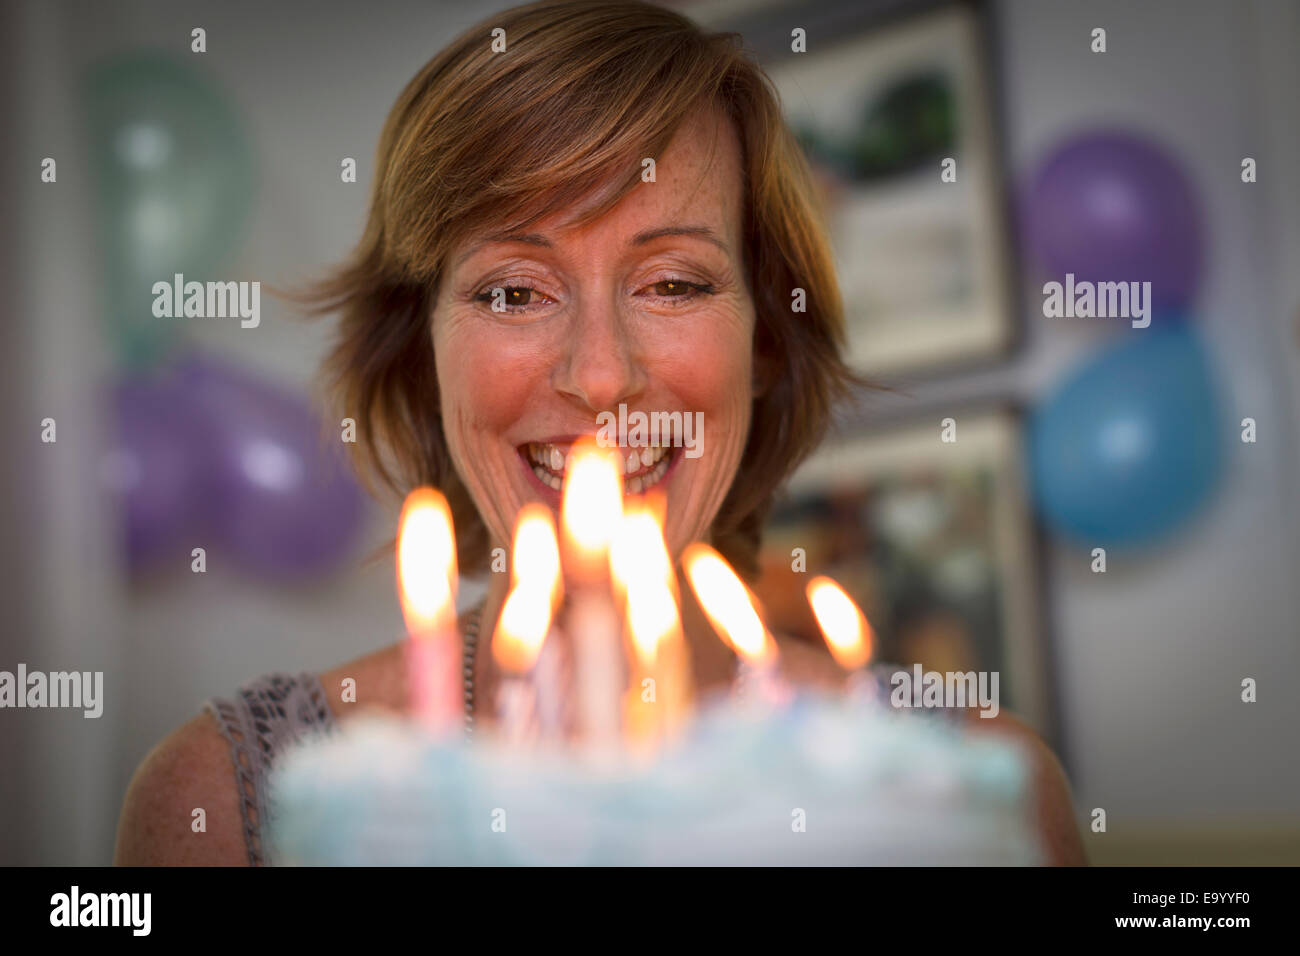 Mature woman holding birthday cake with candles Stock Photo